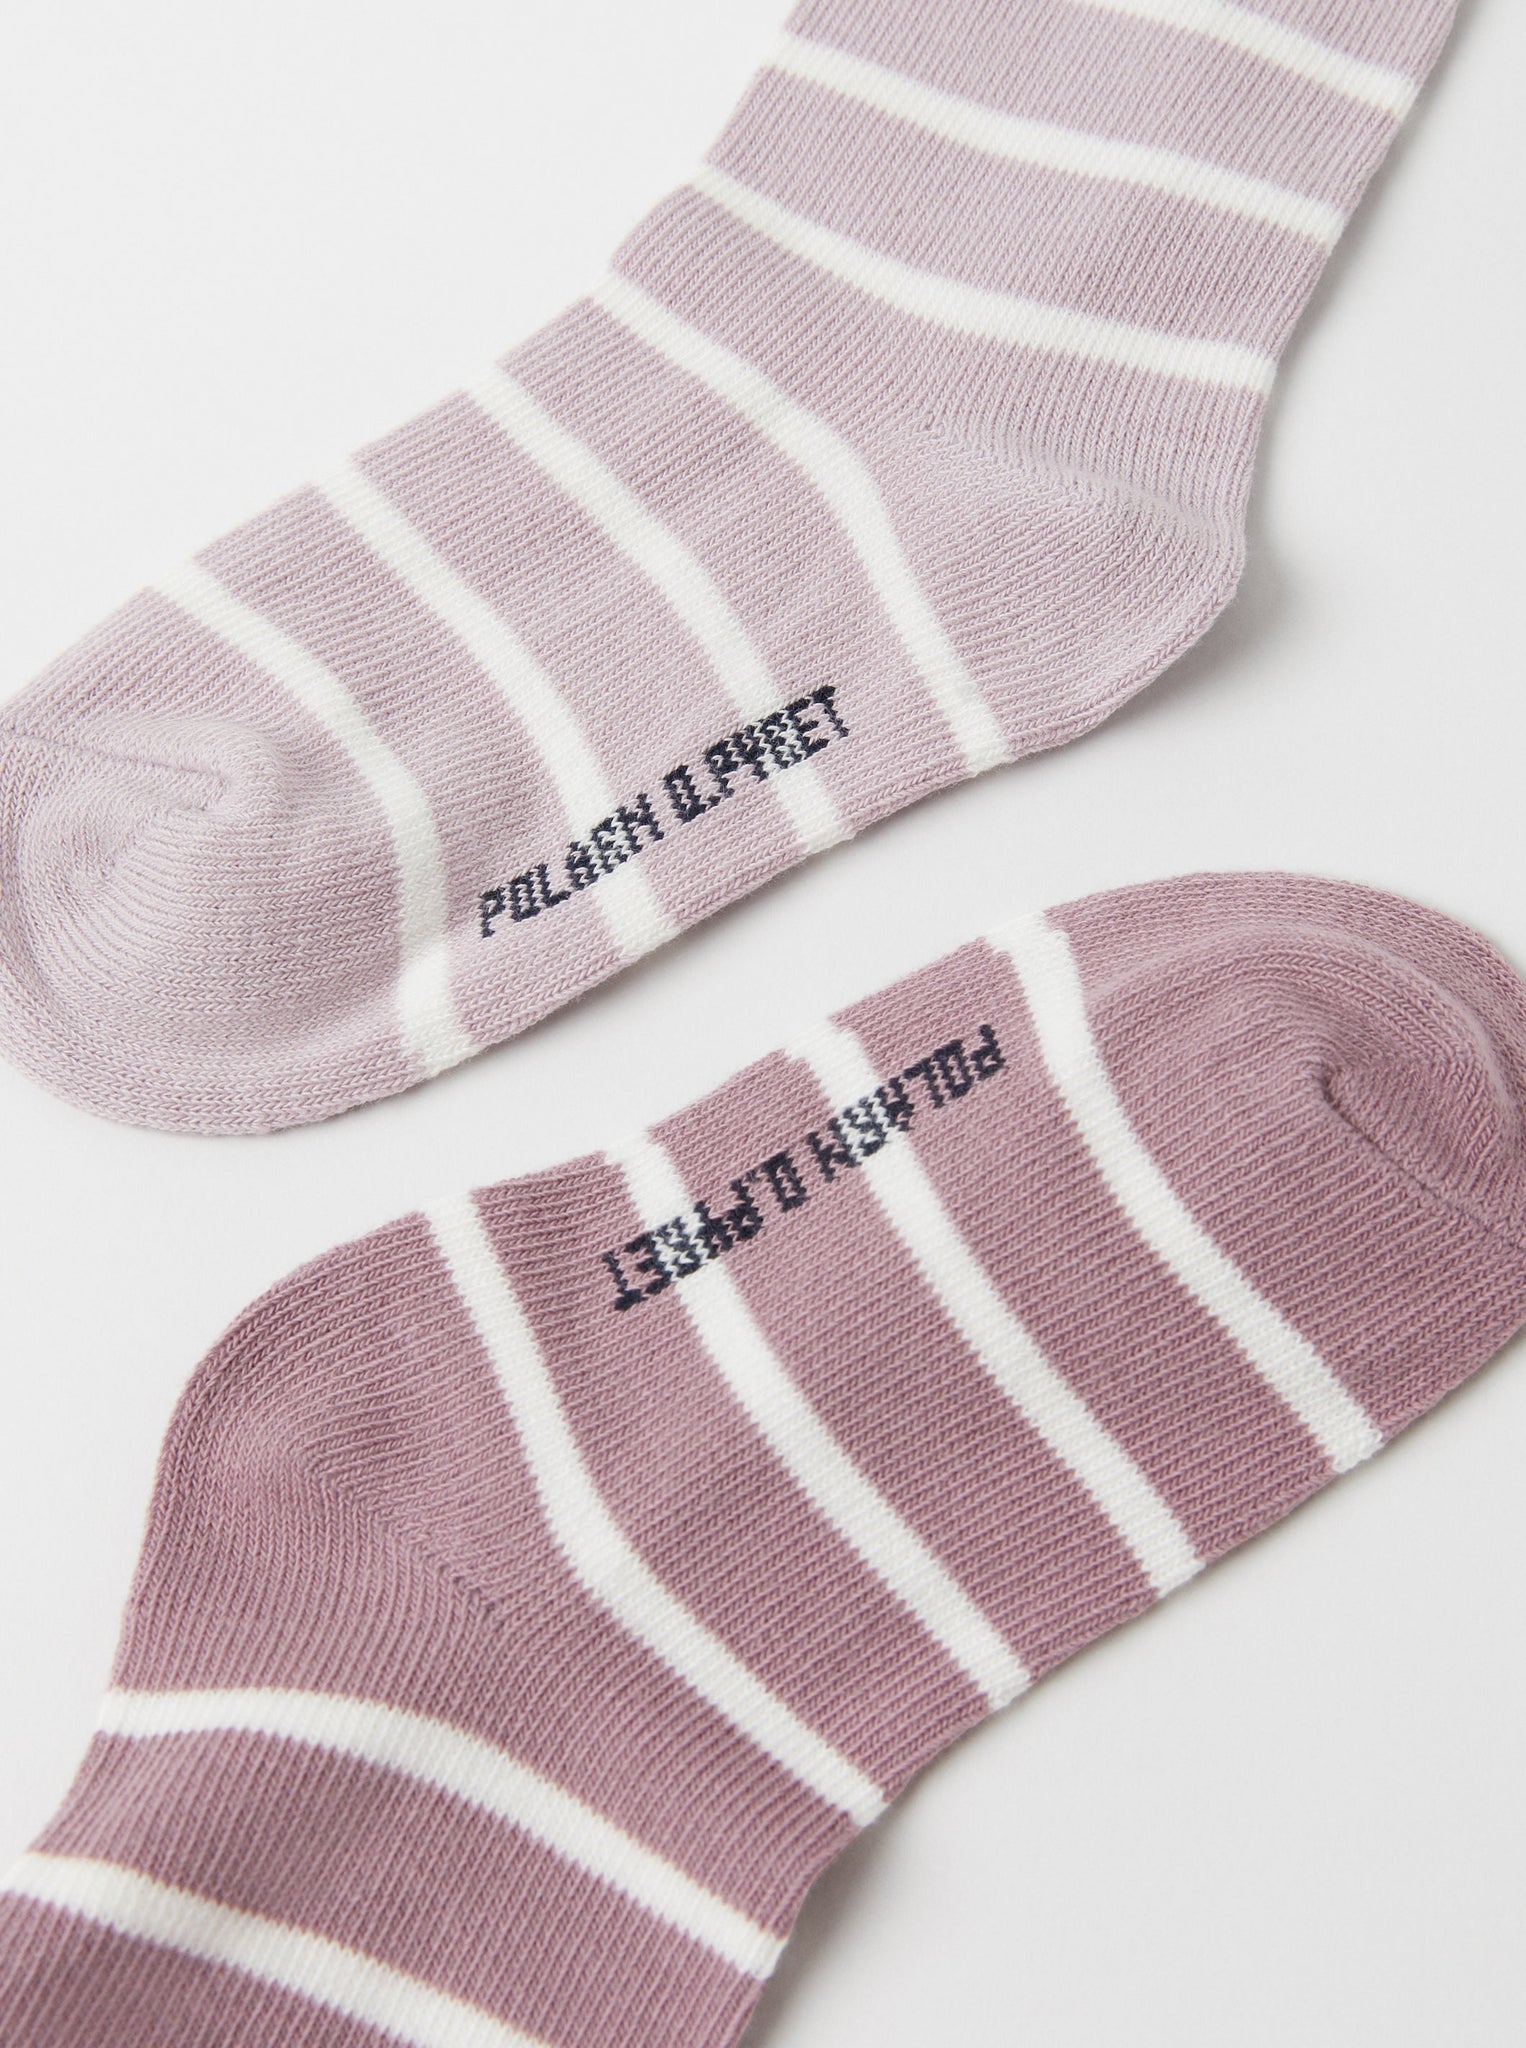 Two Pack Cotton Purple Kids Socks from the Polarn O. Pyret kidswear collection. The best ethical kids clothes